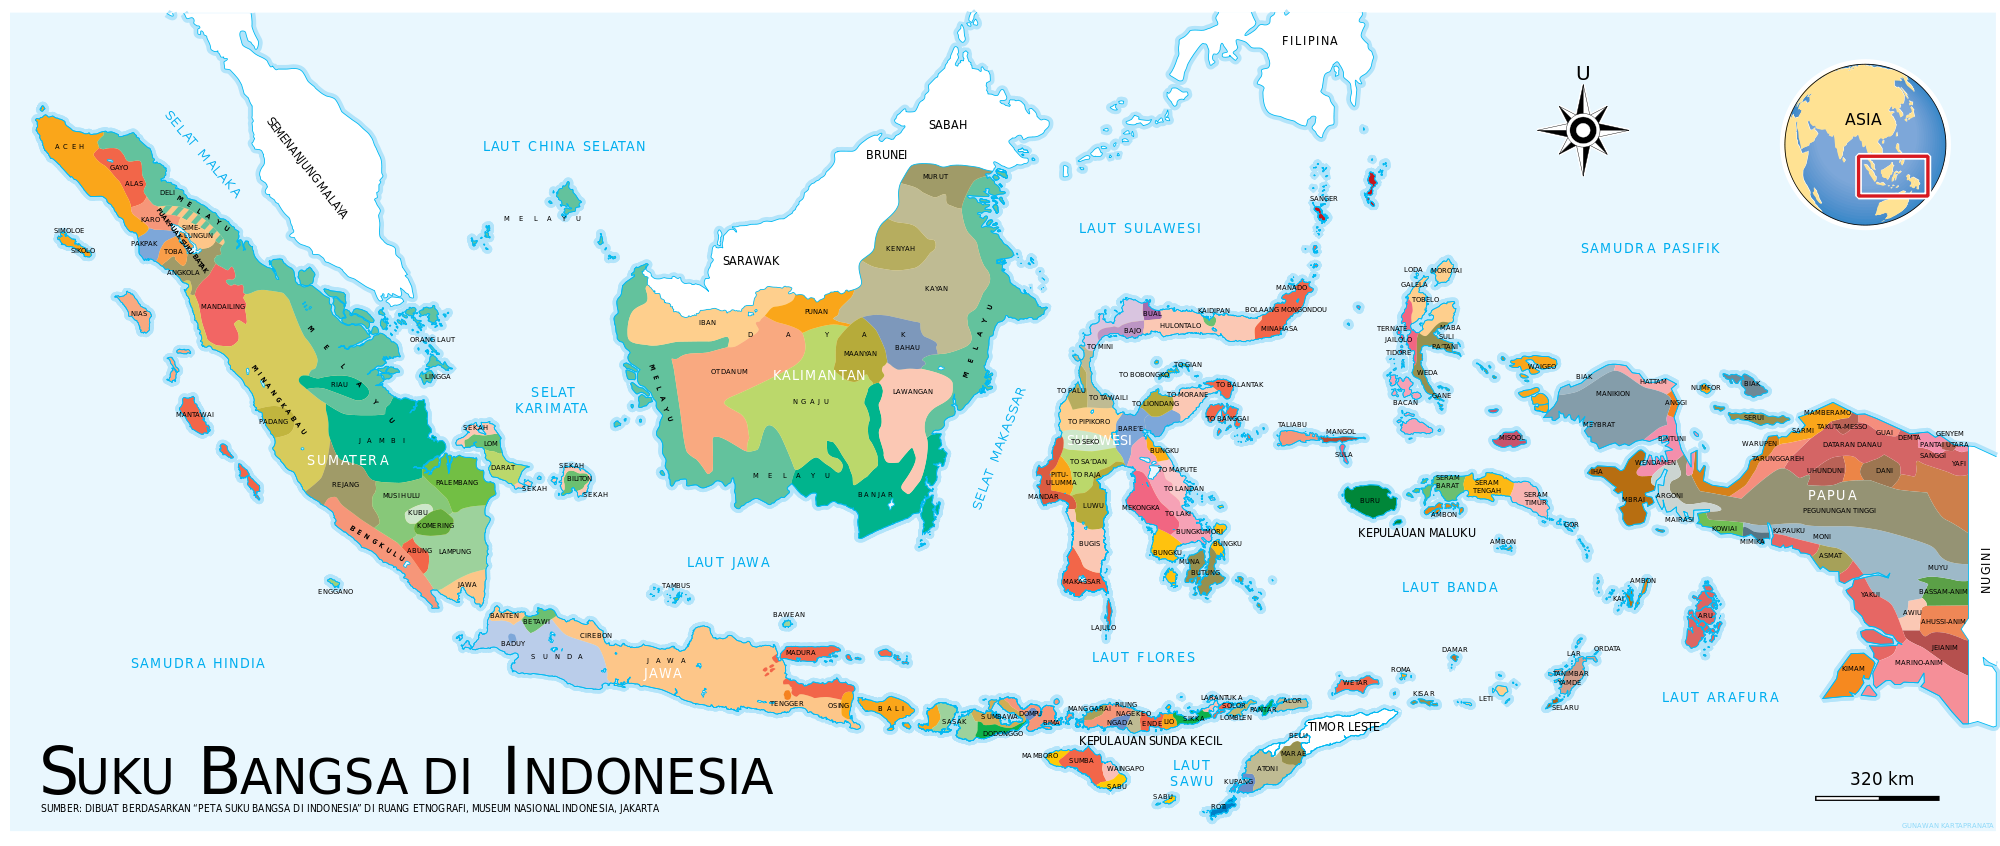 https://upload.wikimedia.org/wikipedia/commons/thumb/c/c0/Indonesia_Ethnic_Groups_Map_id.svg/2000px-Indonesia_Ethnic_Groups_Map_id.svg.png